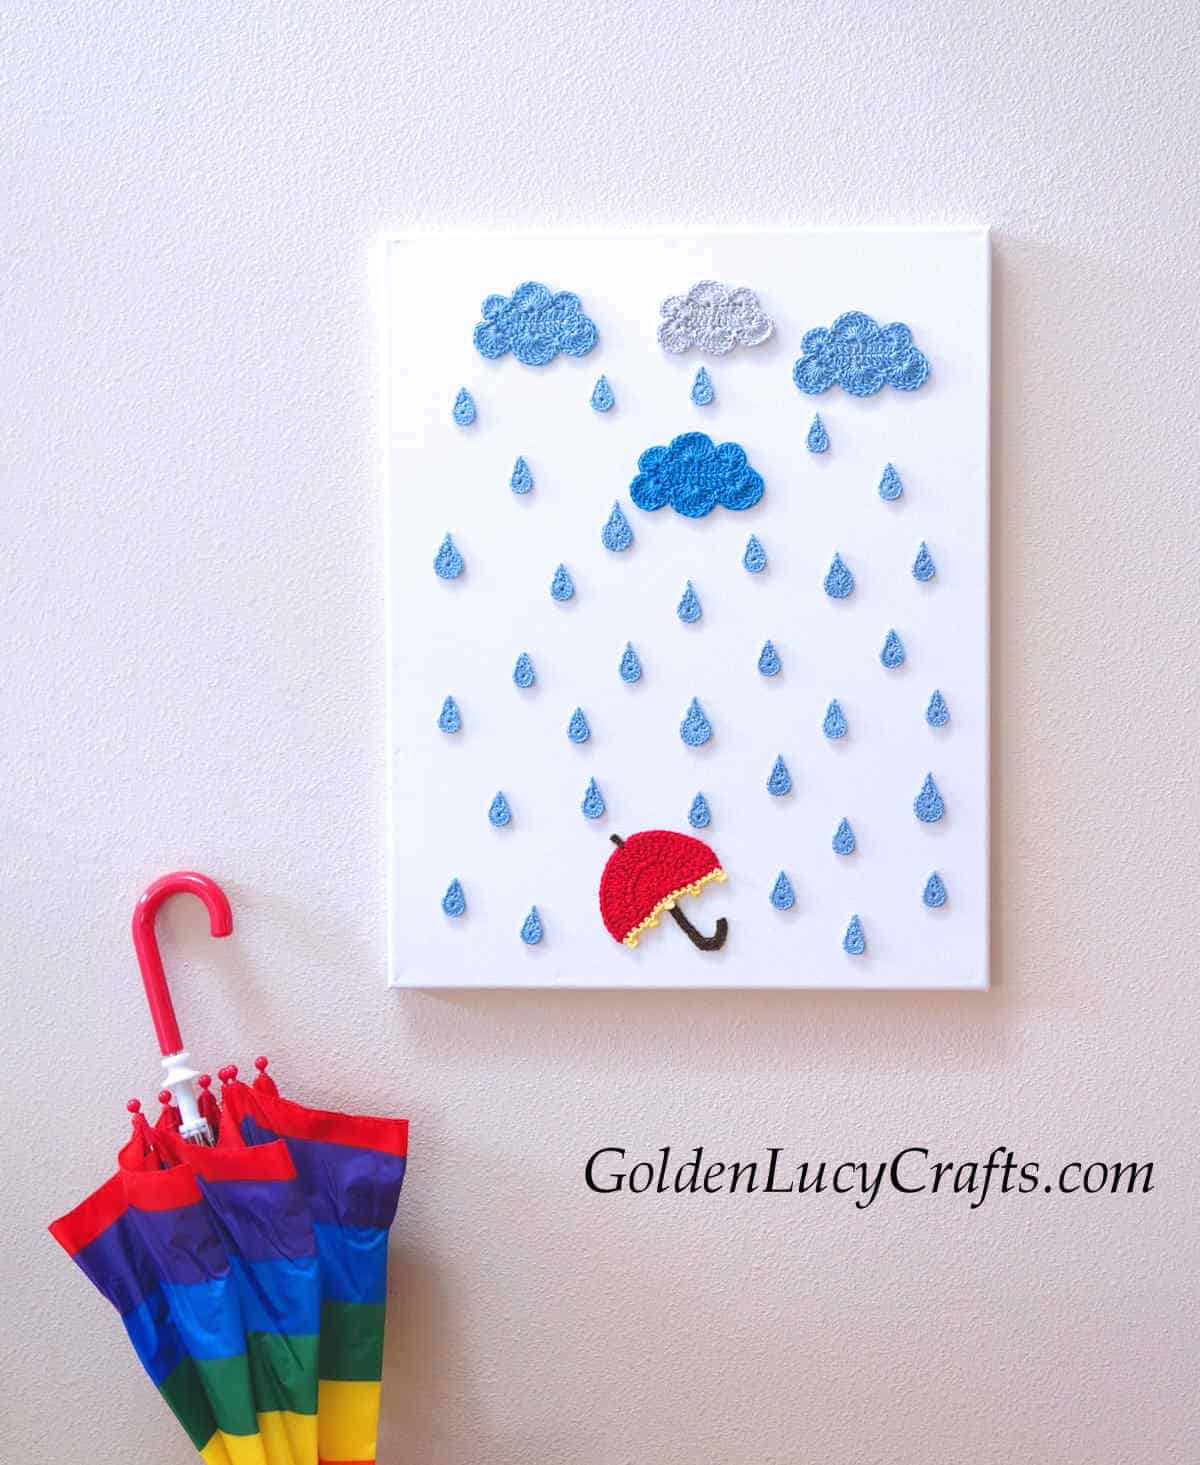 Rainy day wall art made from crocheted appliques.